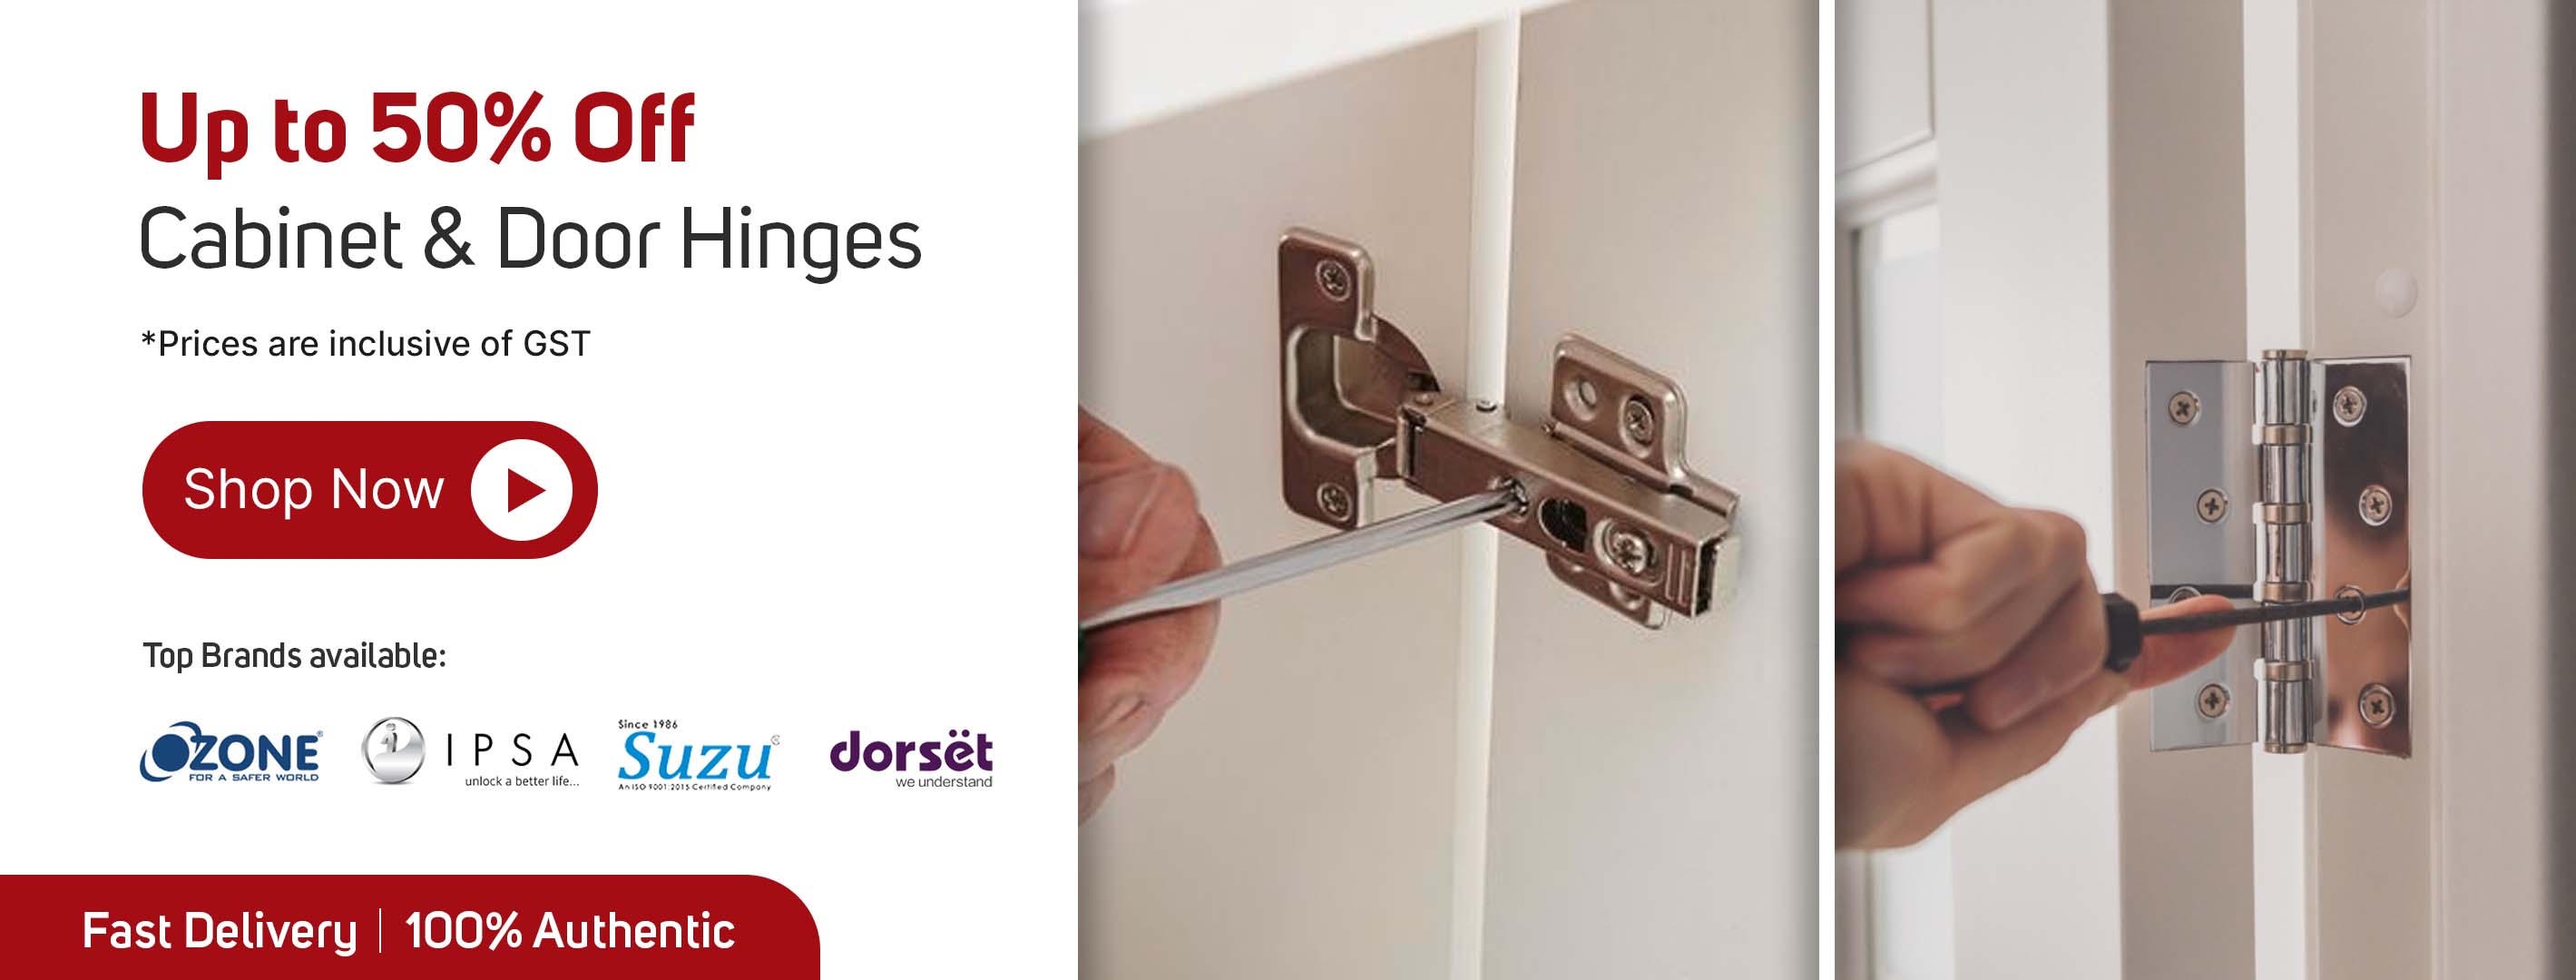 Cabinet and Door Hinges | Up to 50% Off